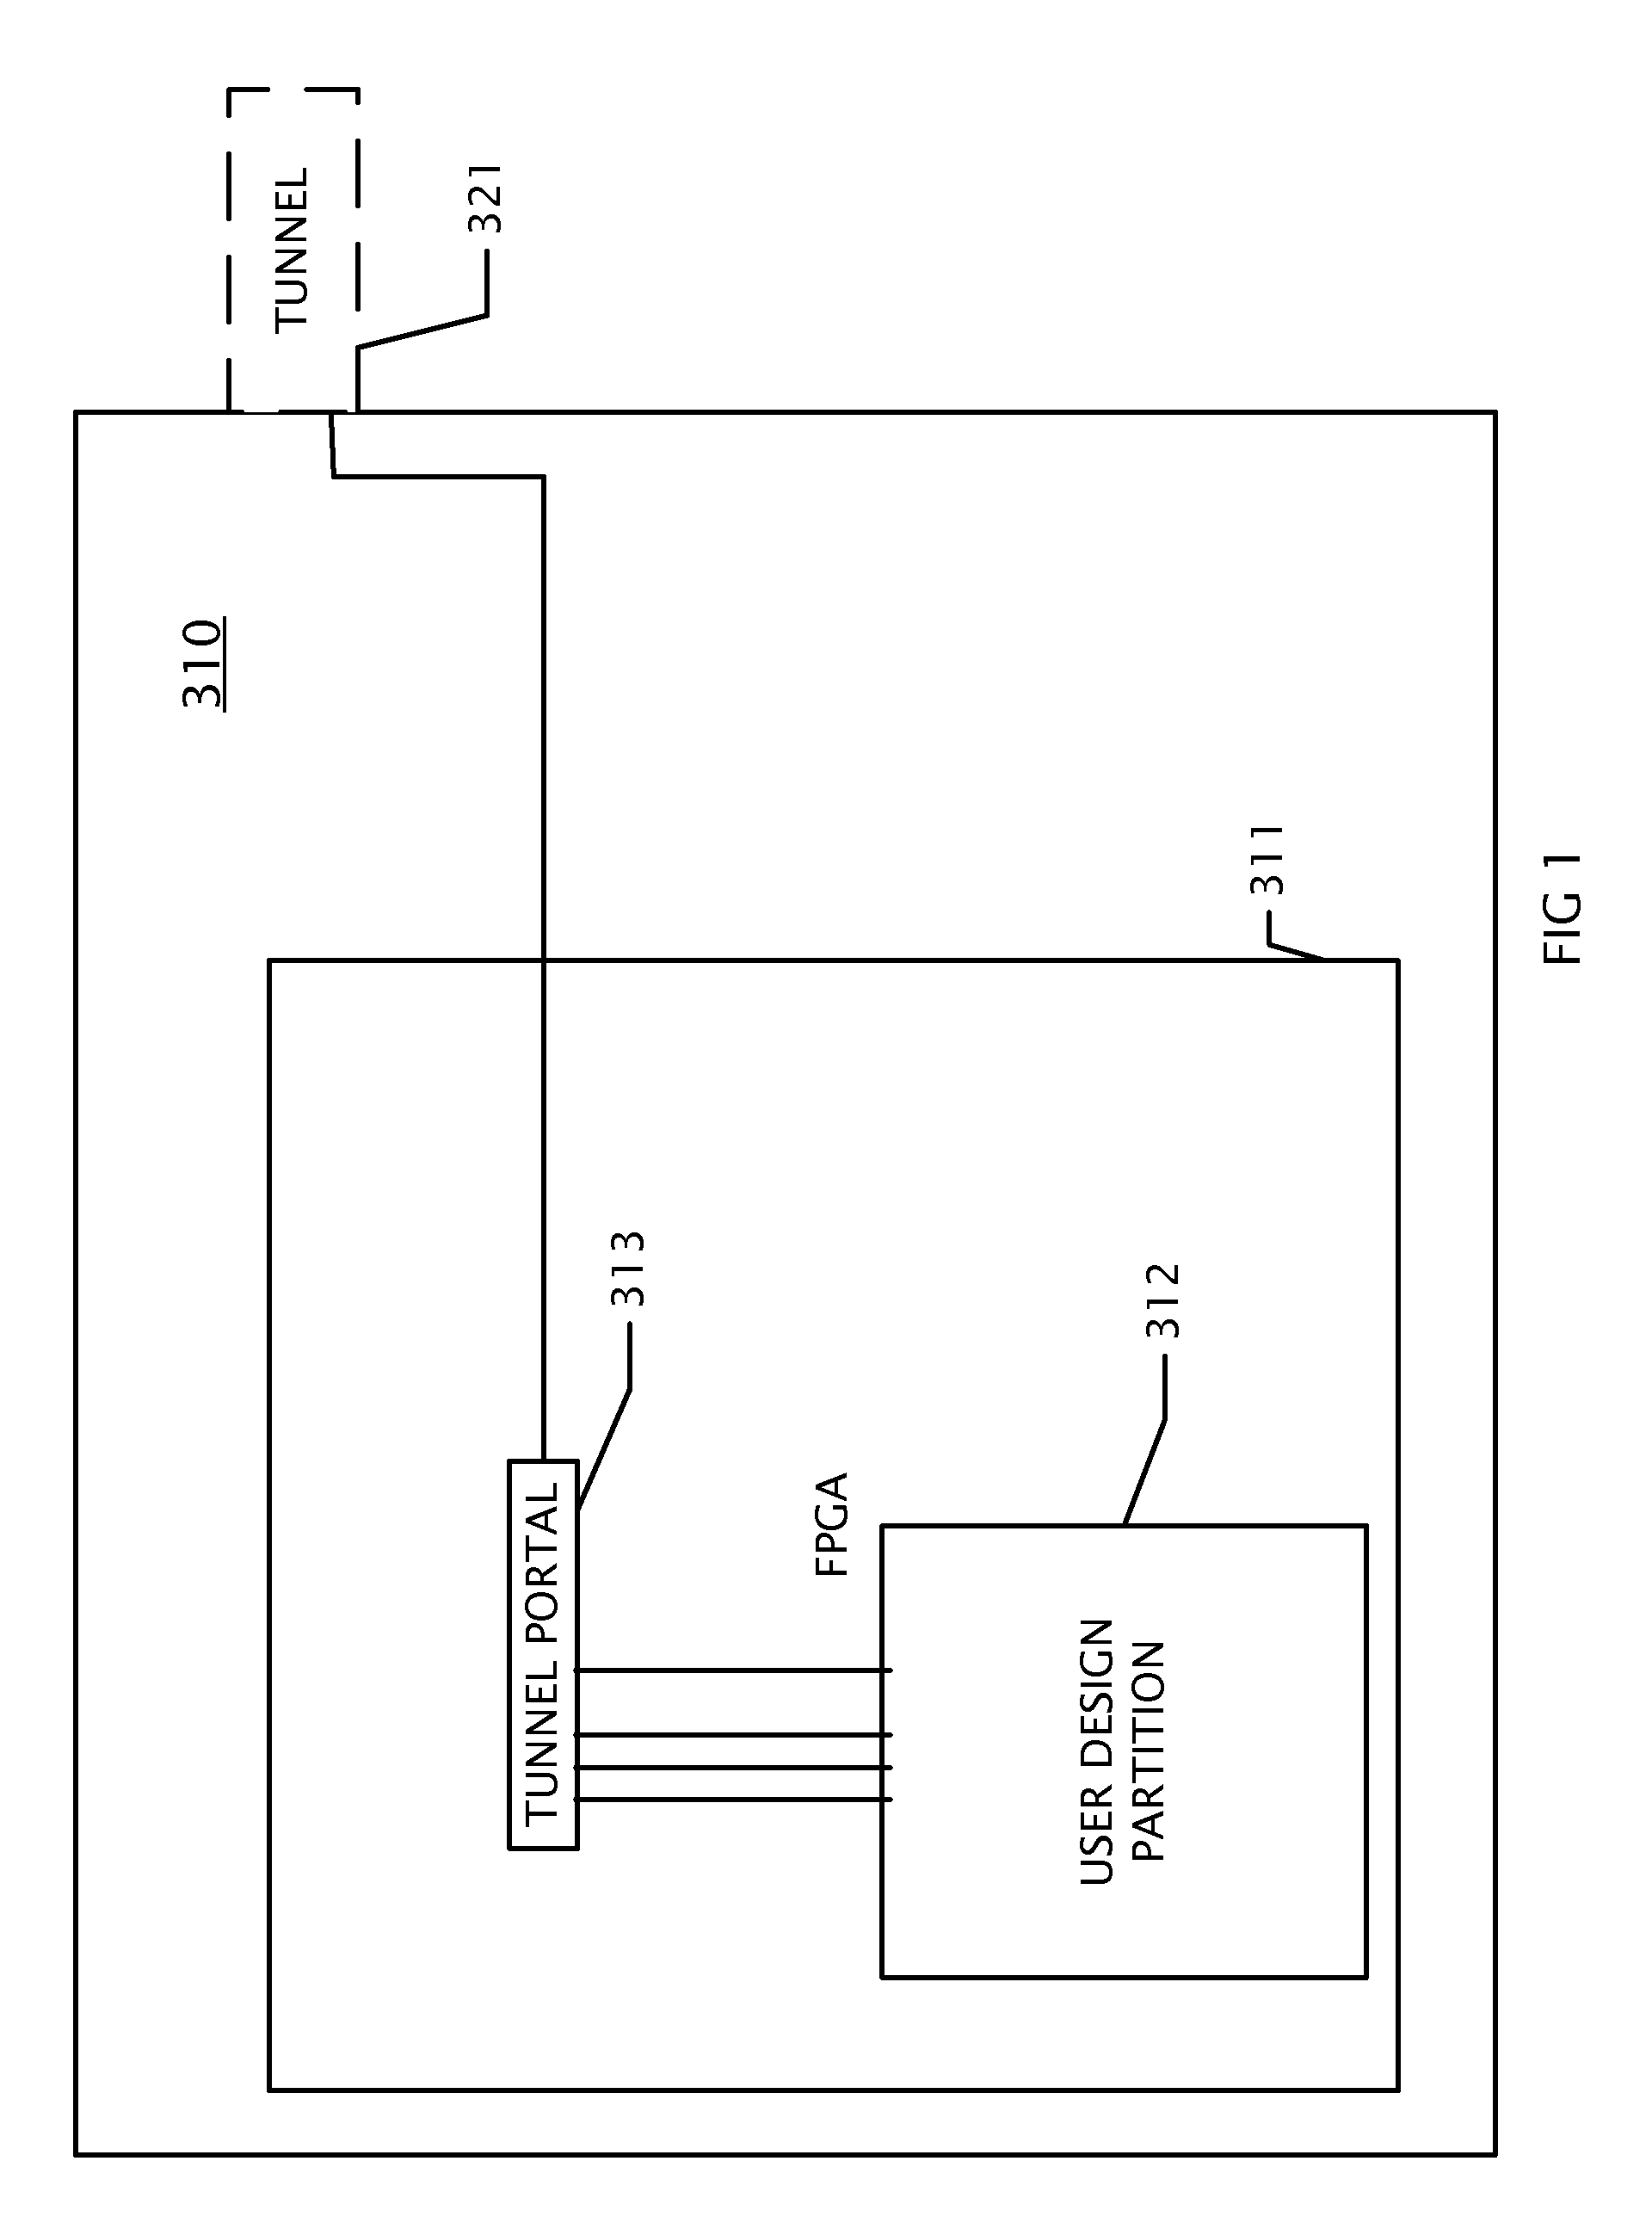 Logic verification module apparatus to serve as a hyper prototype for debugging an electronic design that exceeds the capacity of a single FPGA